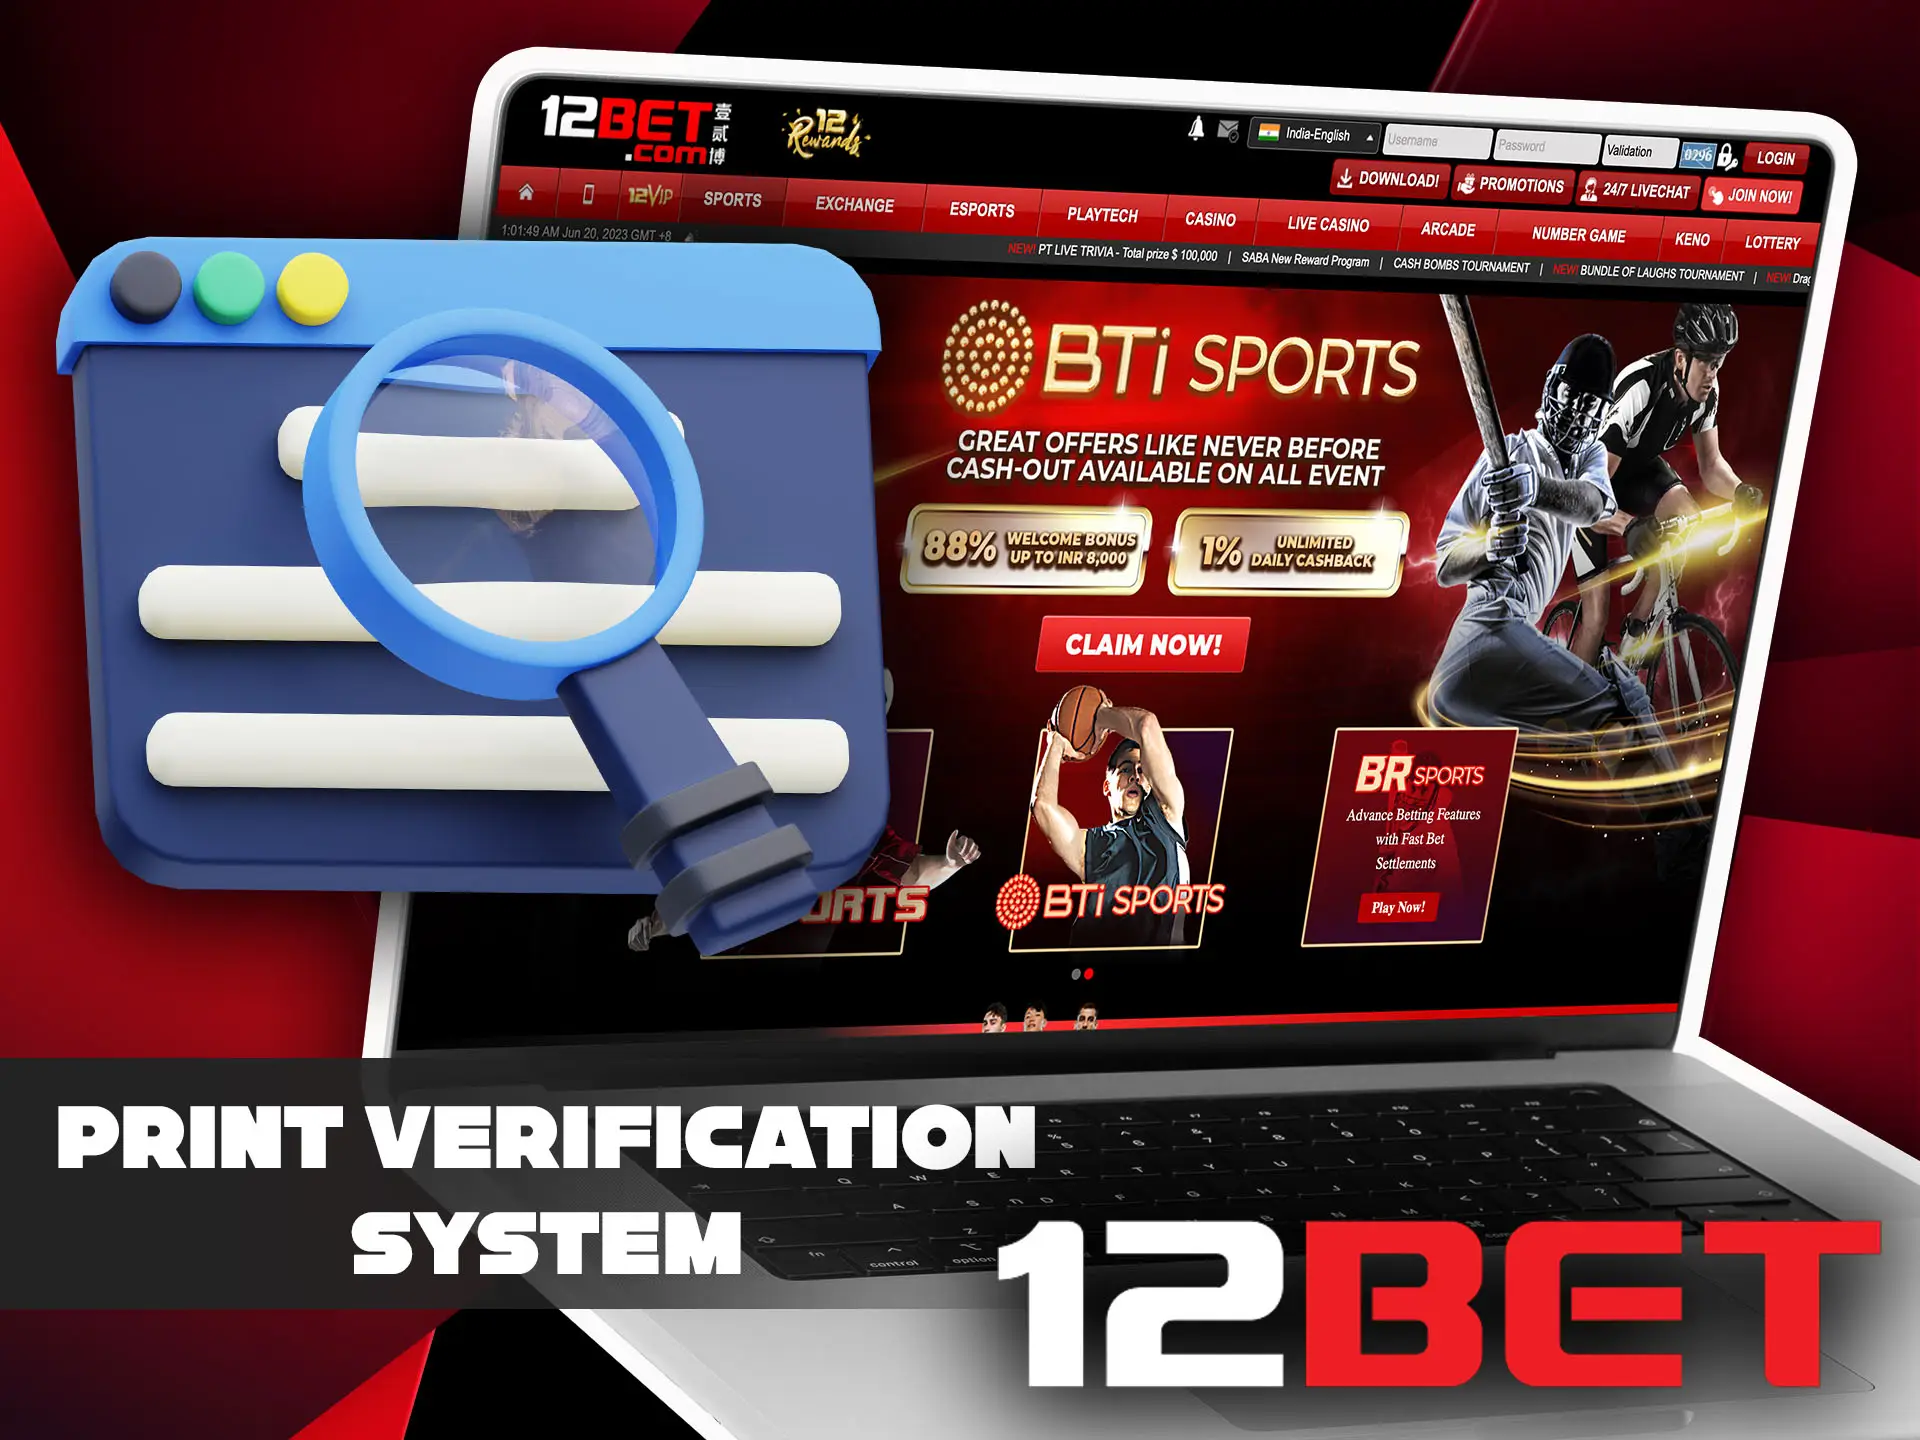 12bet betting company has an integrated print verification system.